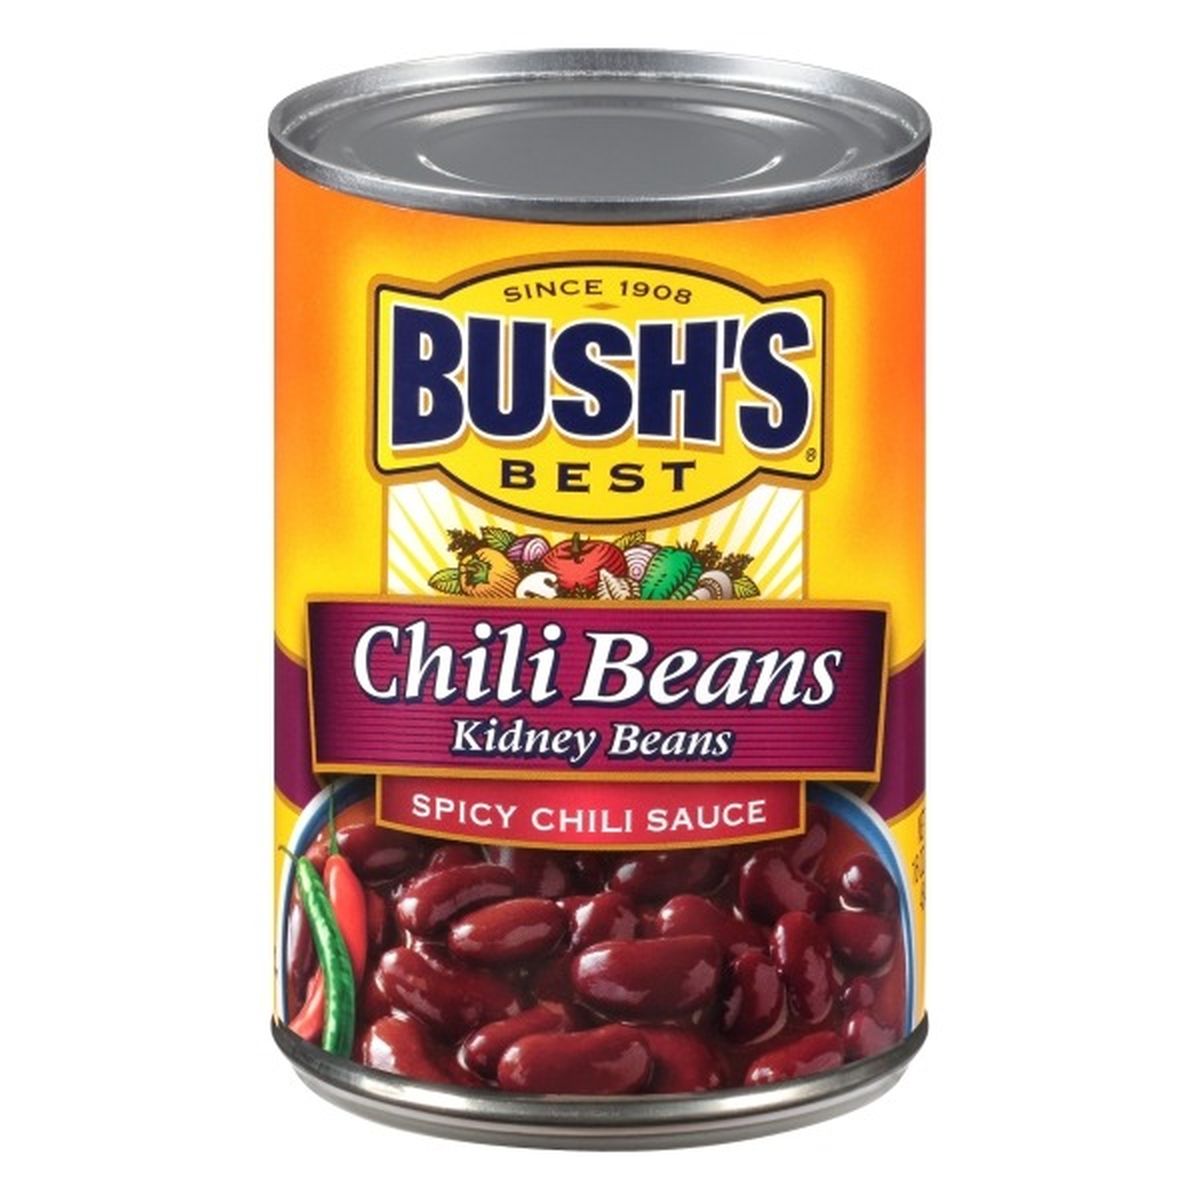 Calories in Bush's Best Kidney Beans, Chili Beans, Spicy